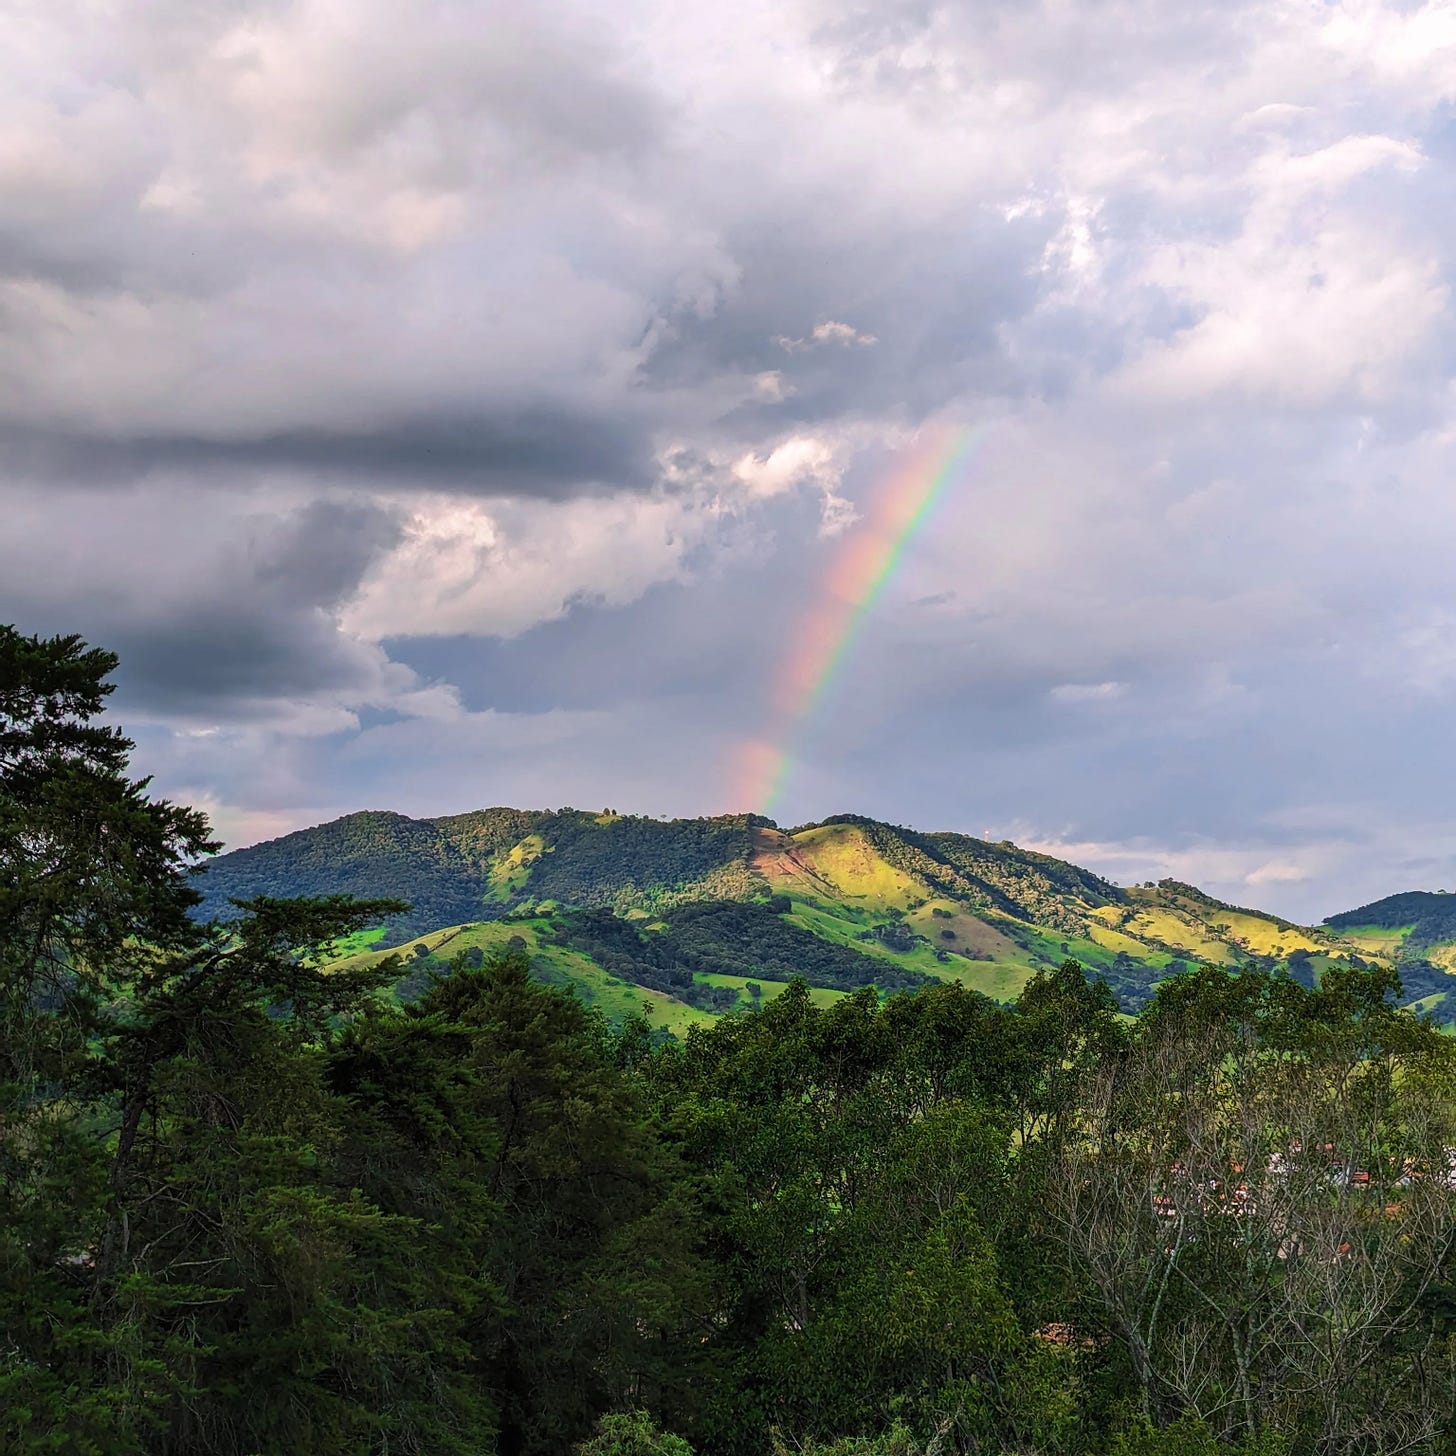 A rainbow appears in the distance, rising from the Mantiqueia mountain range in southern Minas Gerais, into a sky with white and grey skies.